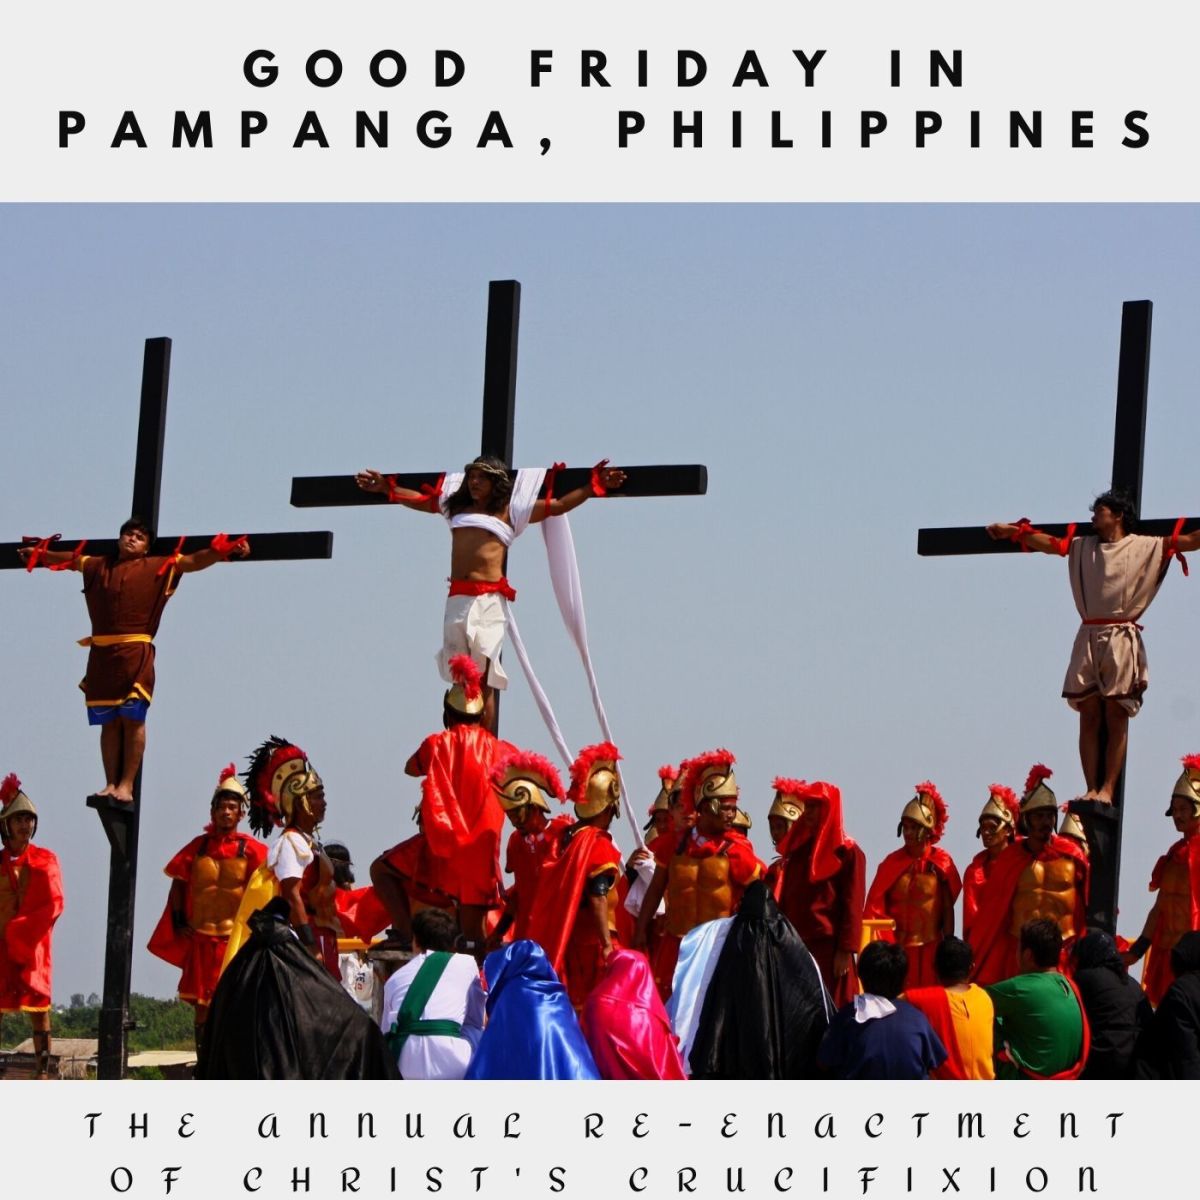 The annual re-enactment of Christ's crucifixion on Good Friday at the Pampanga Province in the Philippines